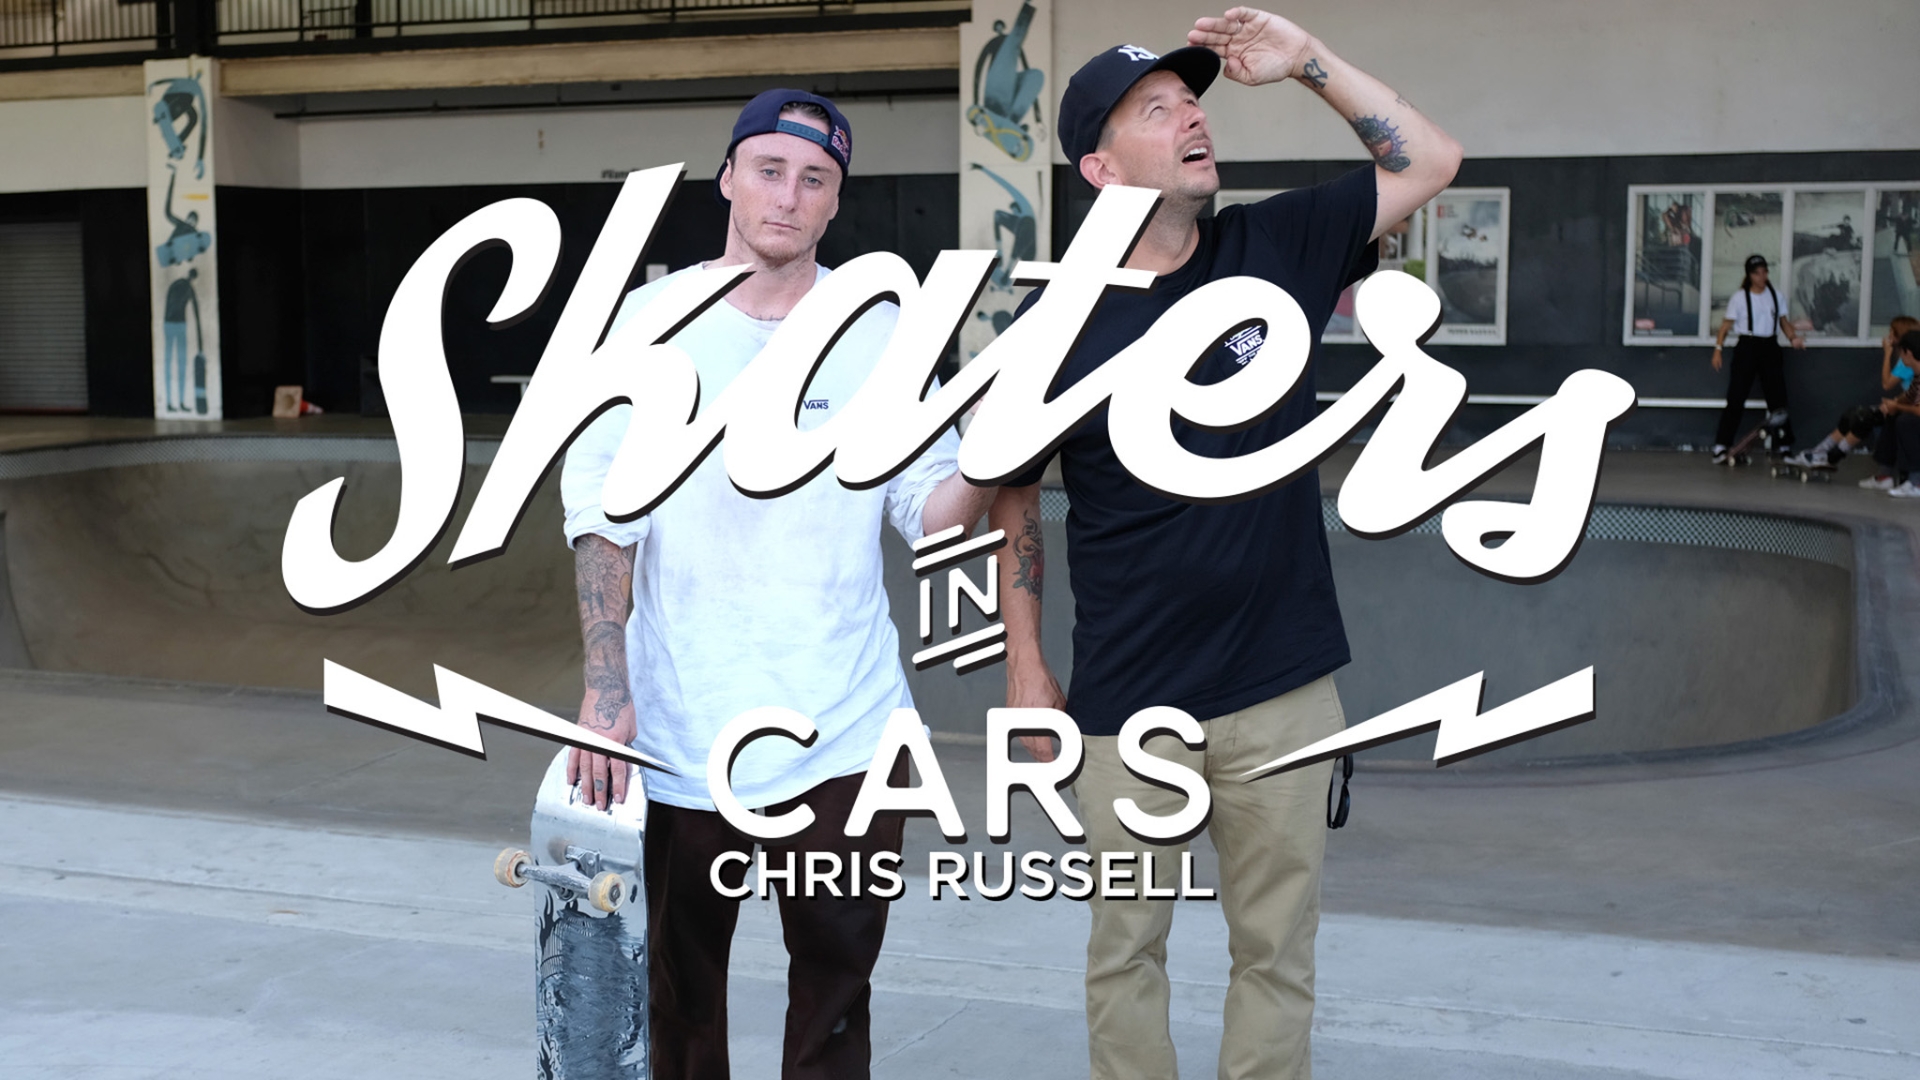 Skaters In Cars Looking At Spots: Chris Russell